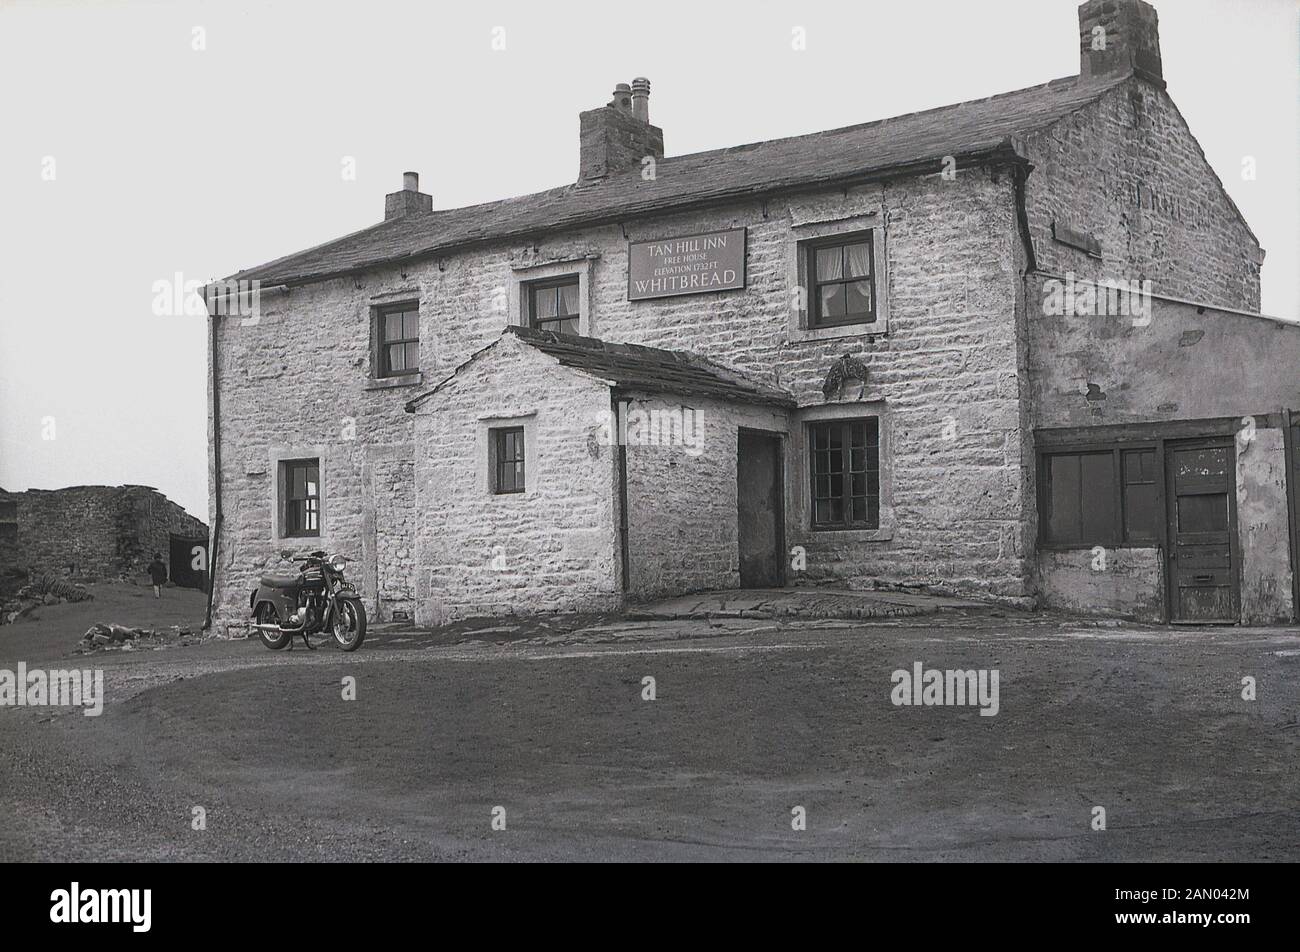 1965, historical picture from this era, a motorbike parked outside the Tan Hill Inn, a unique and historic 17th Century pub standing high-up in the Yorkshire Dales, England, UK. At a height of 1732 ft above sea level, it is the highest pub in Great Britain and stands directly on the Pennine Way, Britain's first long-distance footpath which Alfred Wainwright started and which opened in 1965. Stock Photo